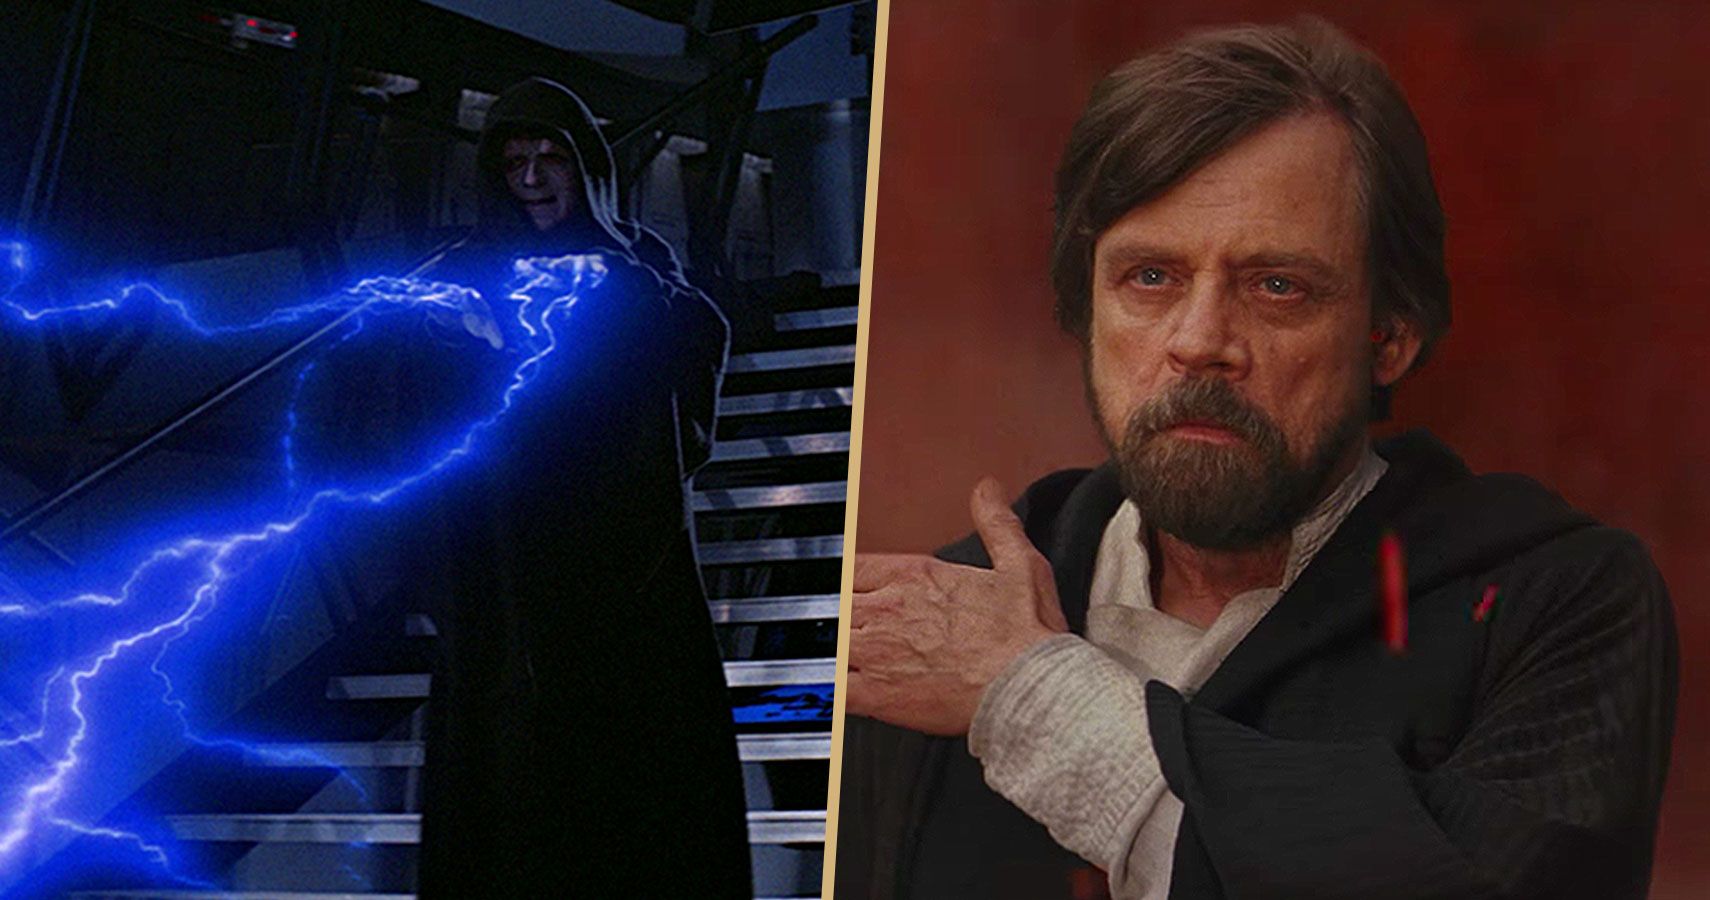 Star Wars The 5 Most Powerful Light Side Force Abilities (& 5 From The Dark Side)